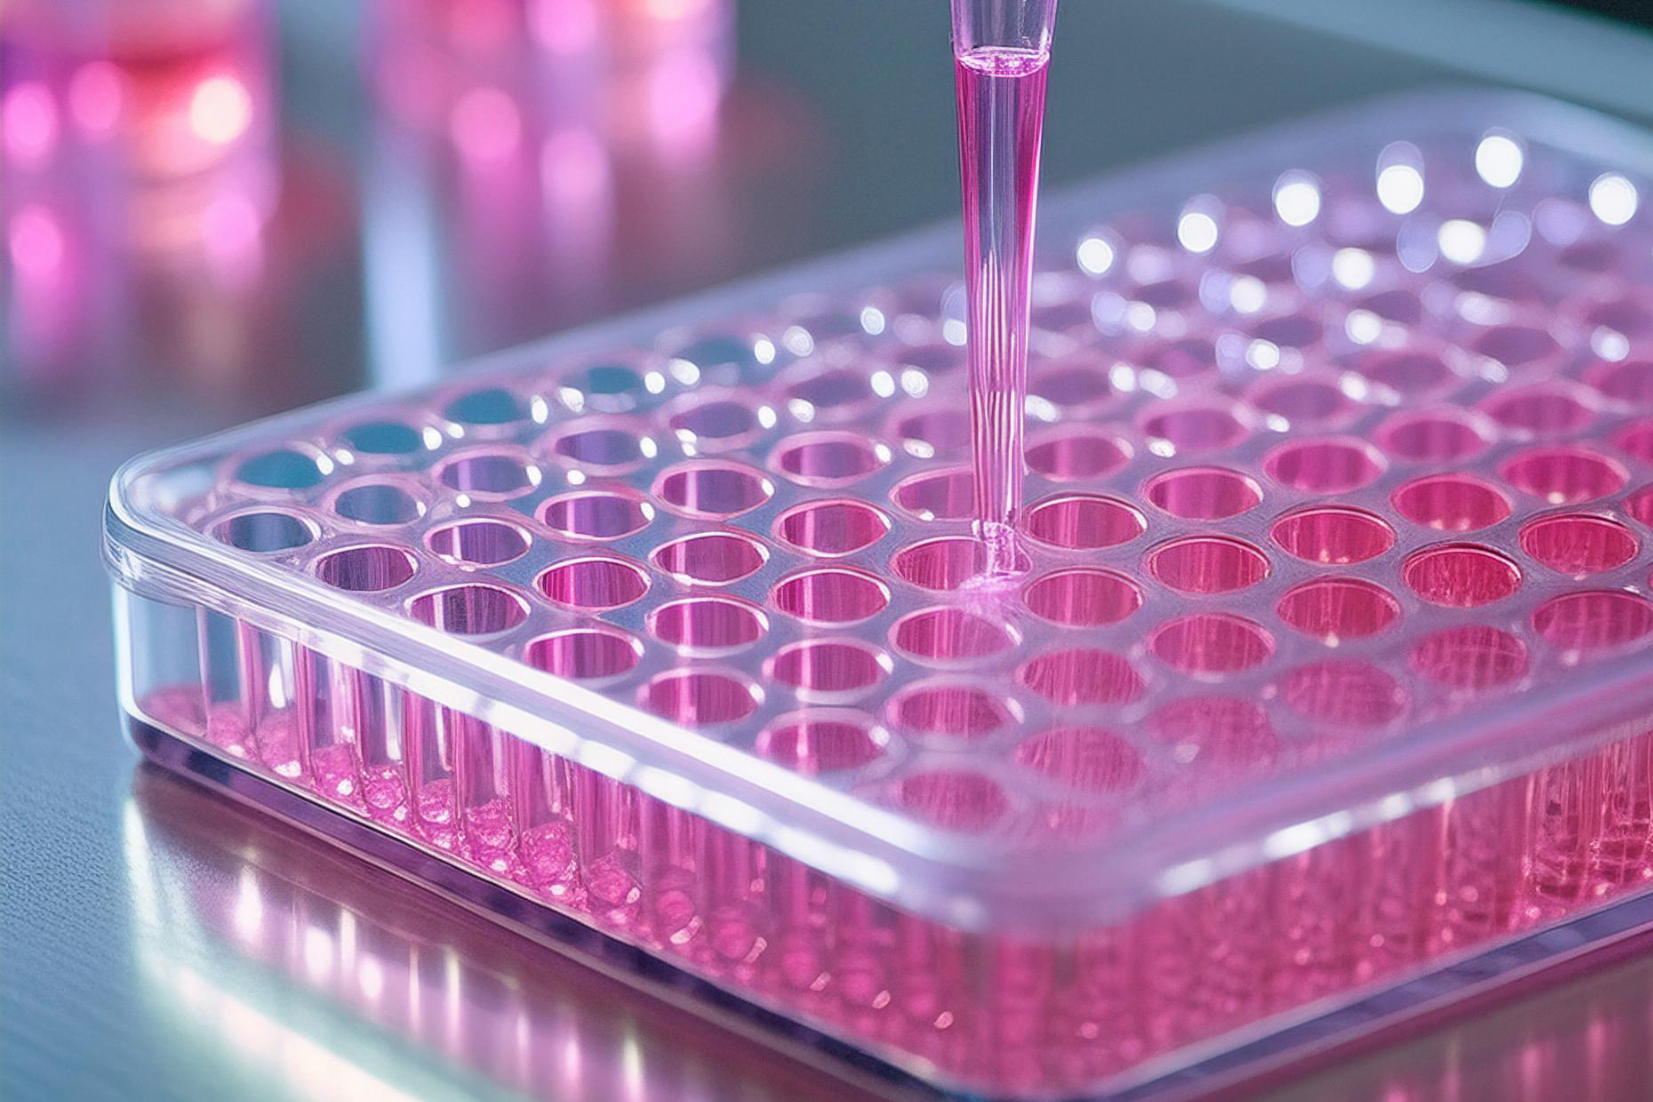 Pipette dispersing pink liquid into well plate